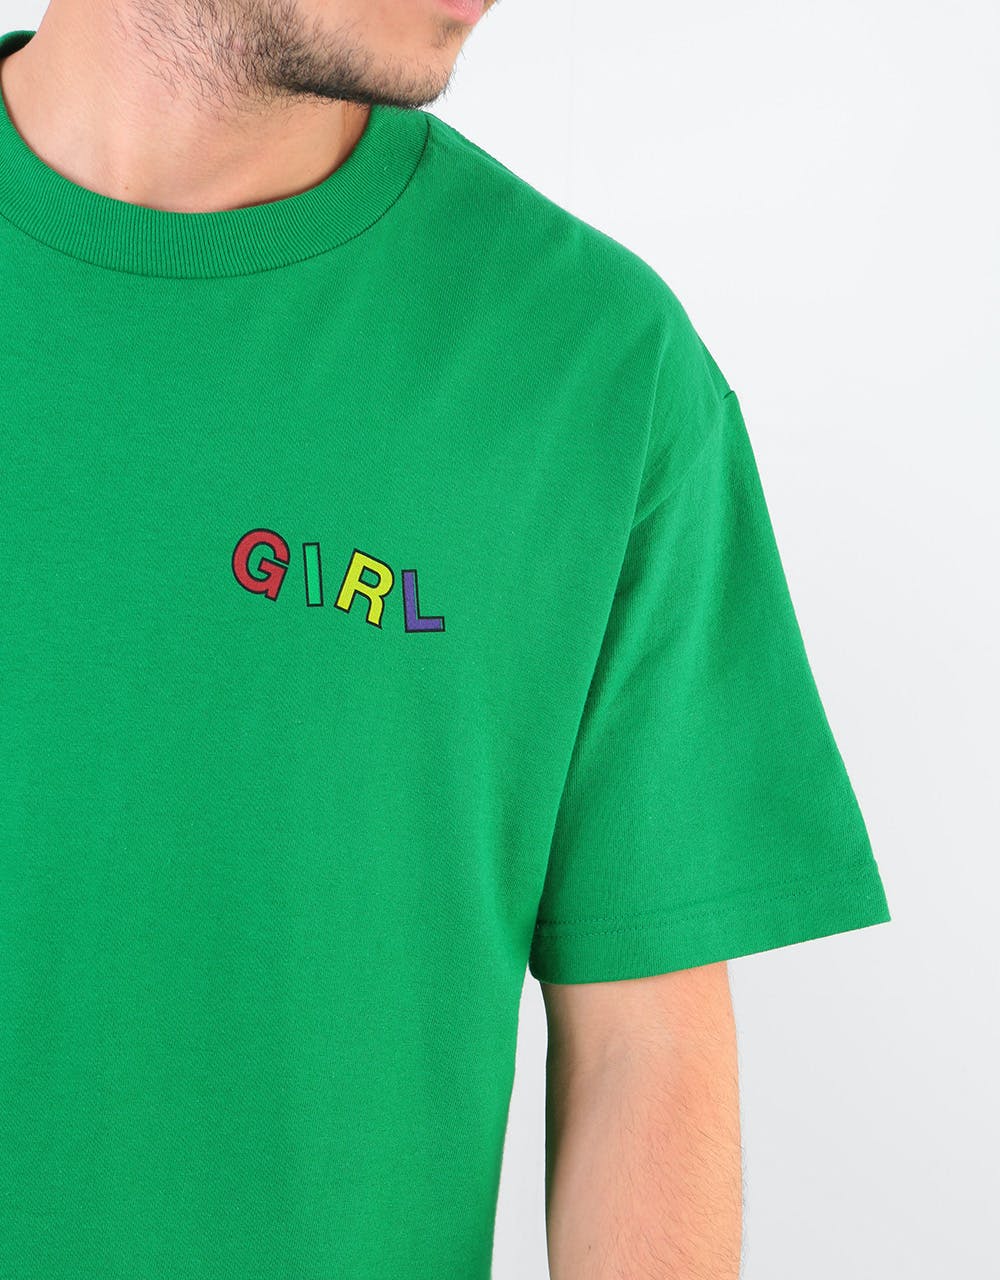 Girl Are We Not? T-Shirt - Kelly Green